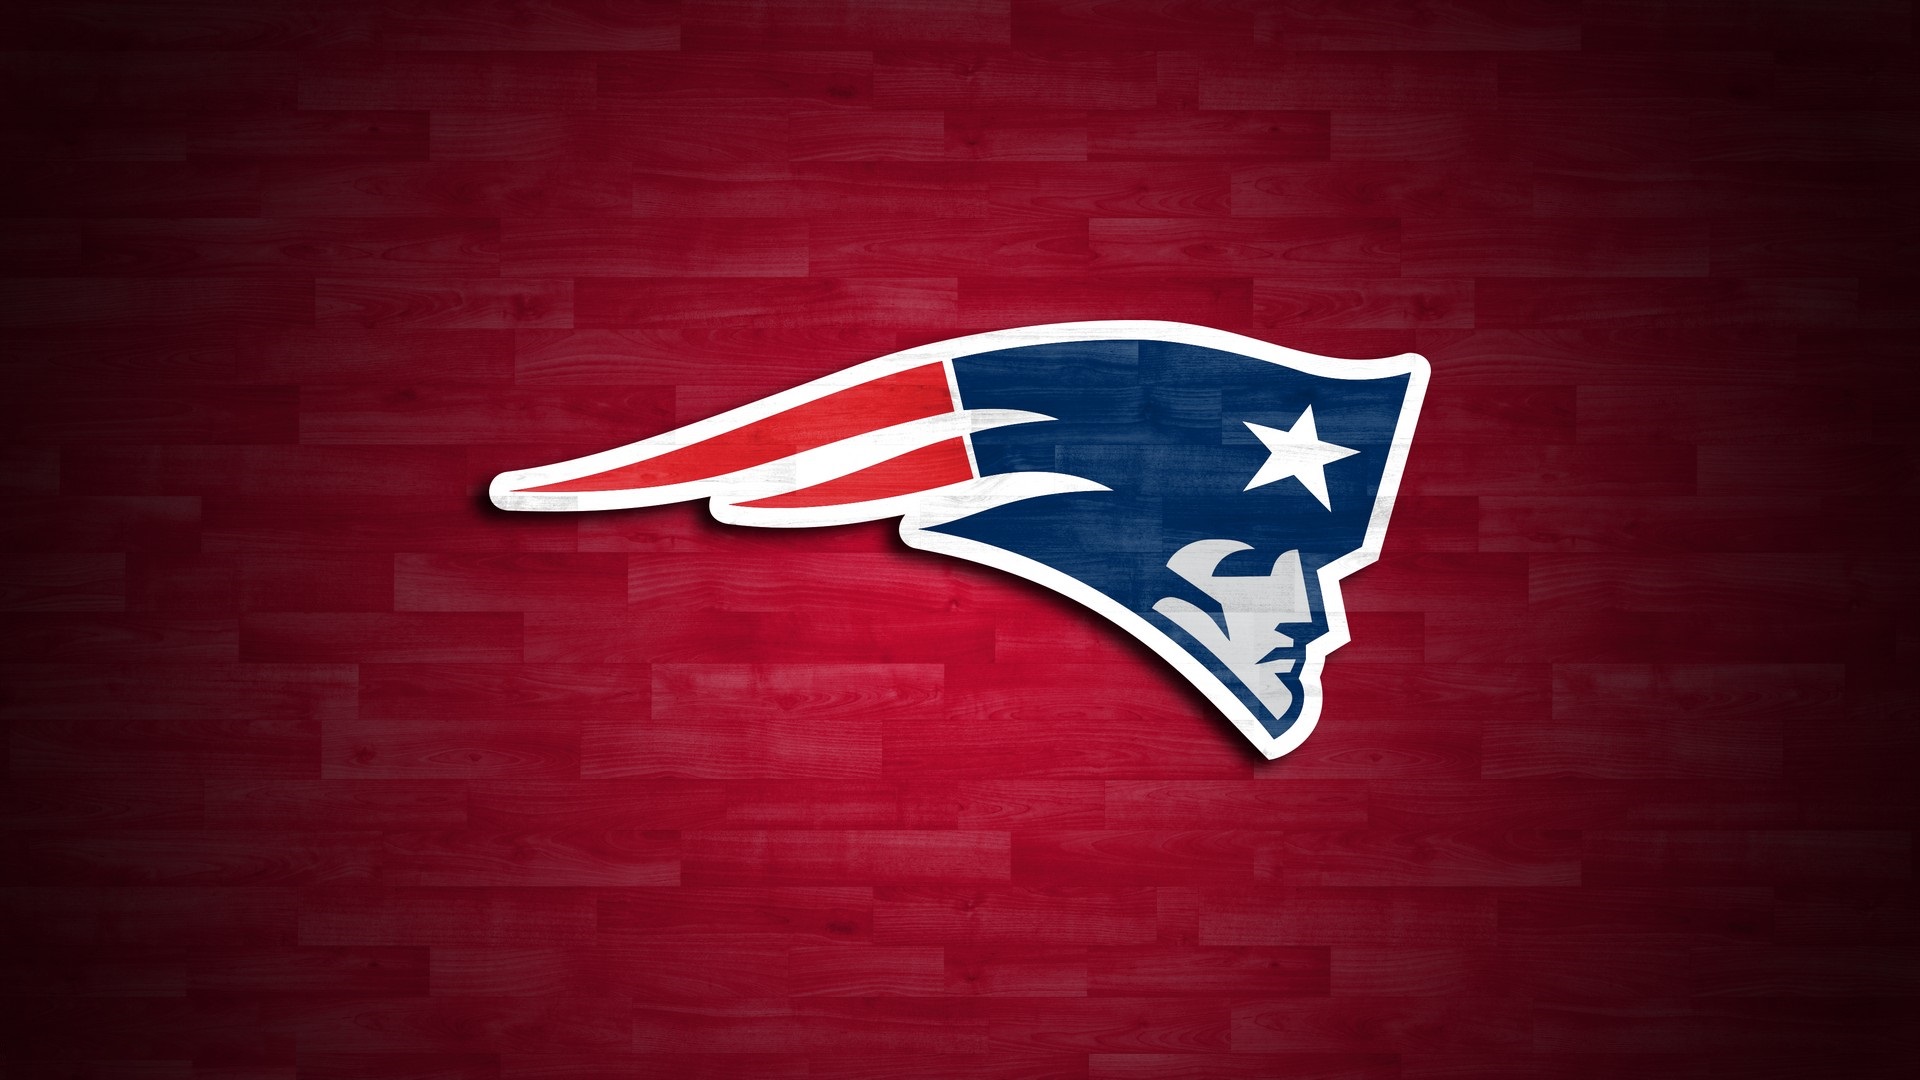 New England Patriots Wallpaper HD with high-resolution 1920x1080 pixel. Download and set as wallpaper for Desktop Computer, Apple iPhone X, XS Max, XR, 8, 7, 6, SE, iPad, Android